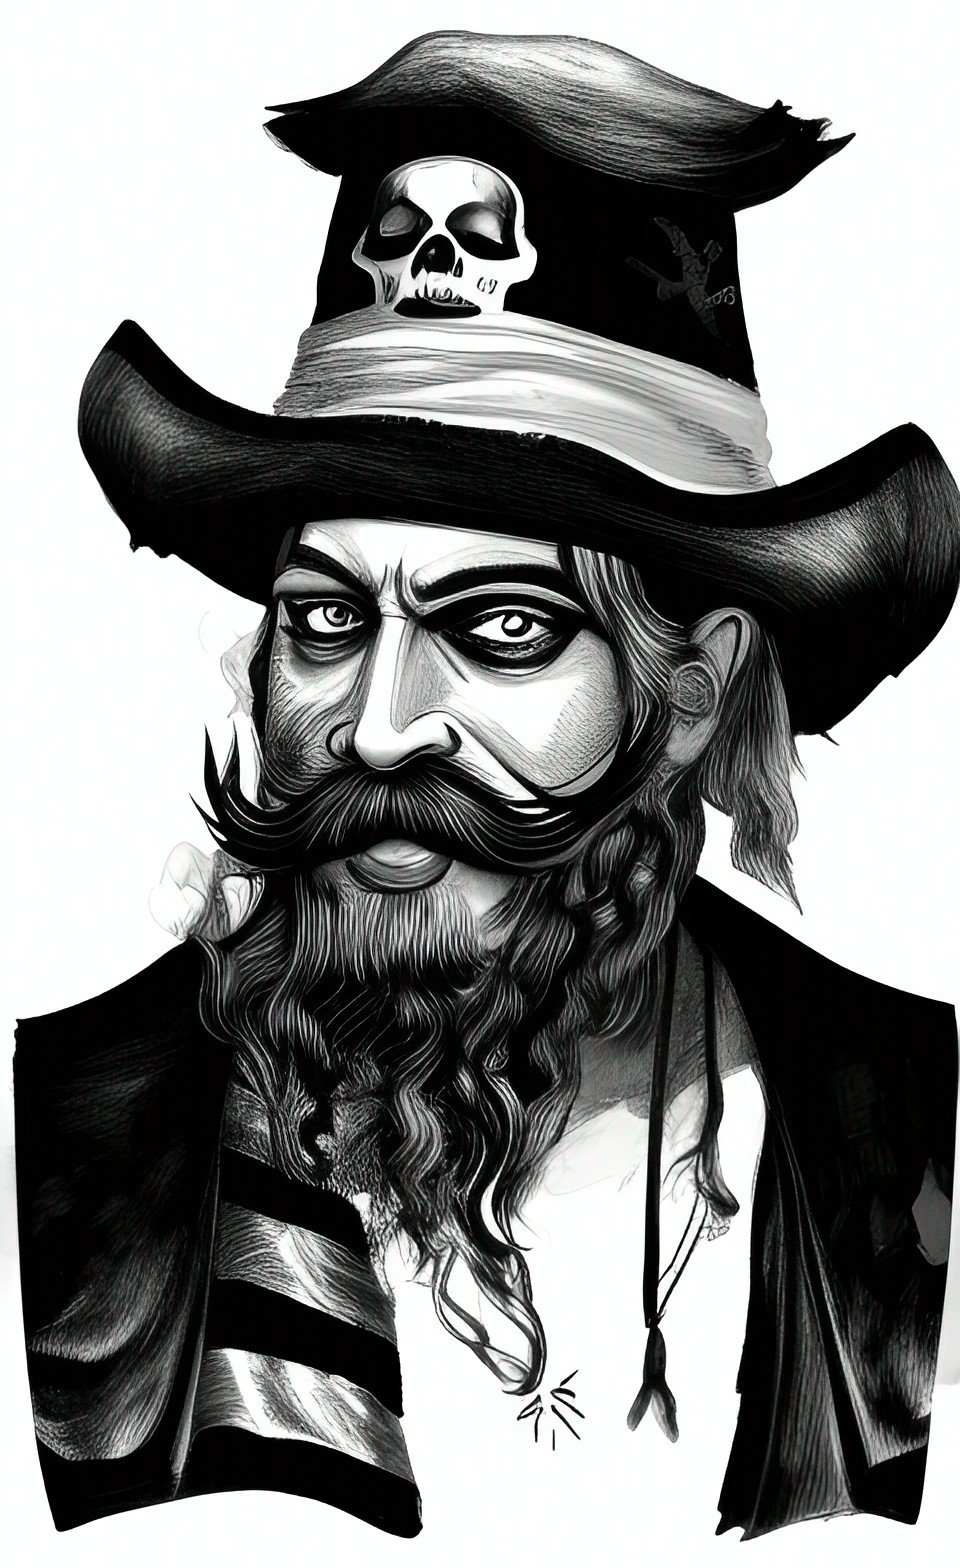 A pirate with a straggly beard offers an evil leer. His had features a skull image.